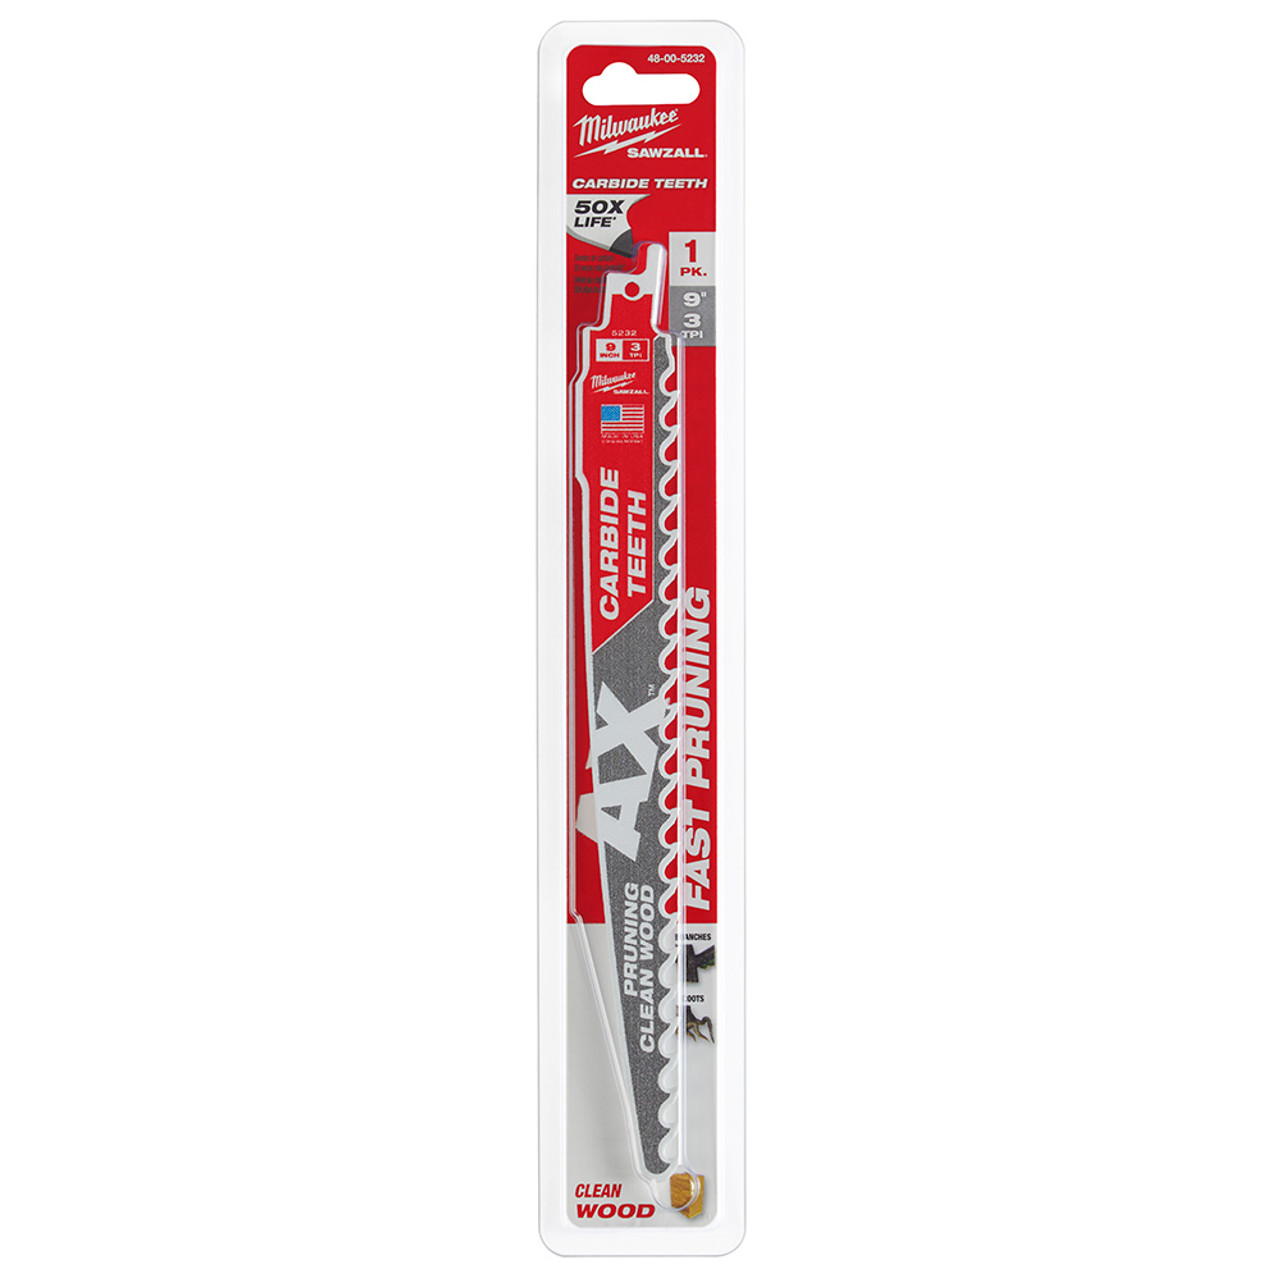 Milwaukee 48-00-5232 9 in. 3 TPI The AX w/ Carbide Teeth for Pruning and Clean Wood 1PK